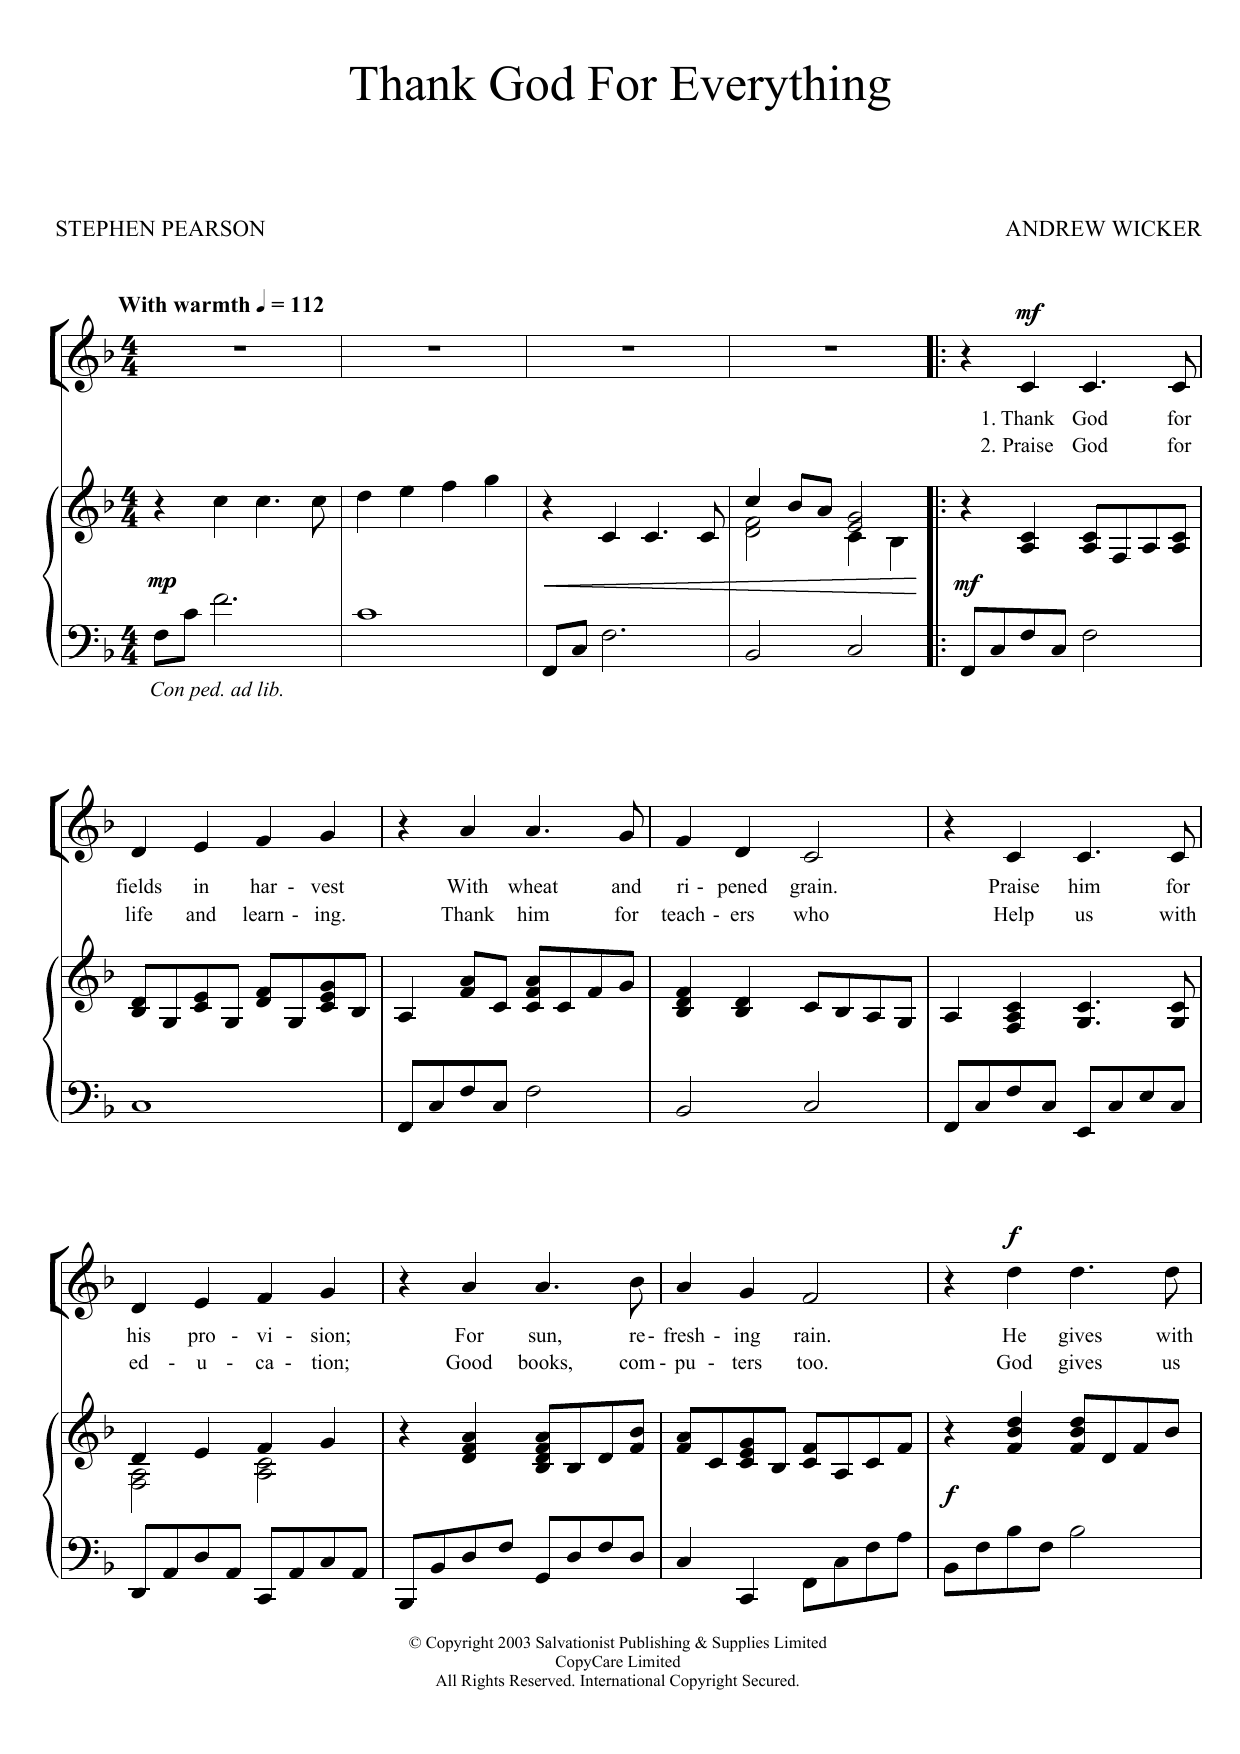 Download The Salvation Army Thank God For Everything Sheet Music